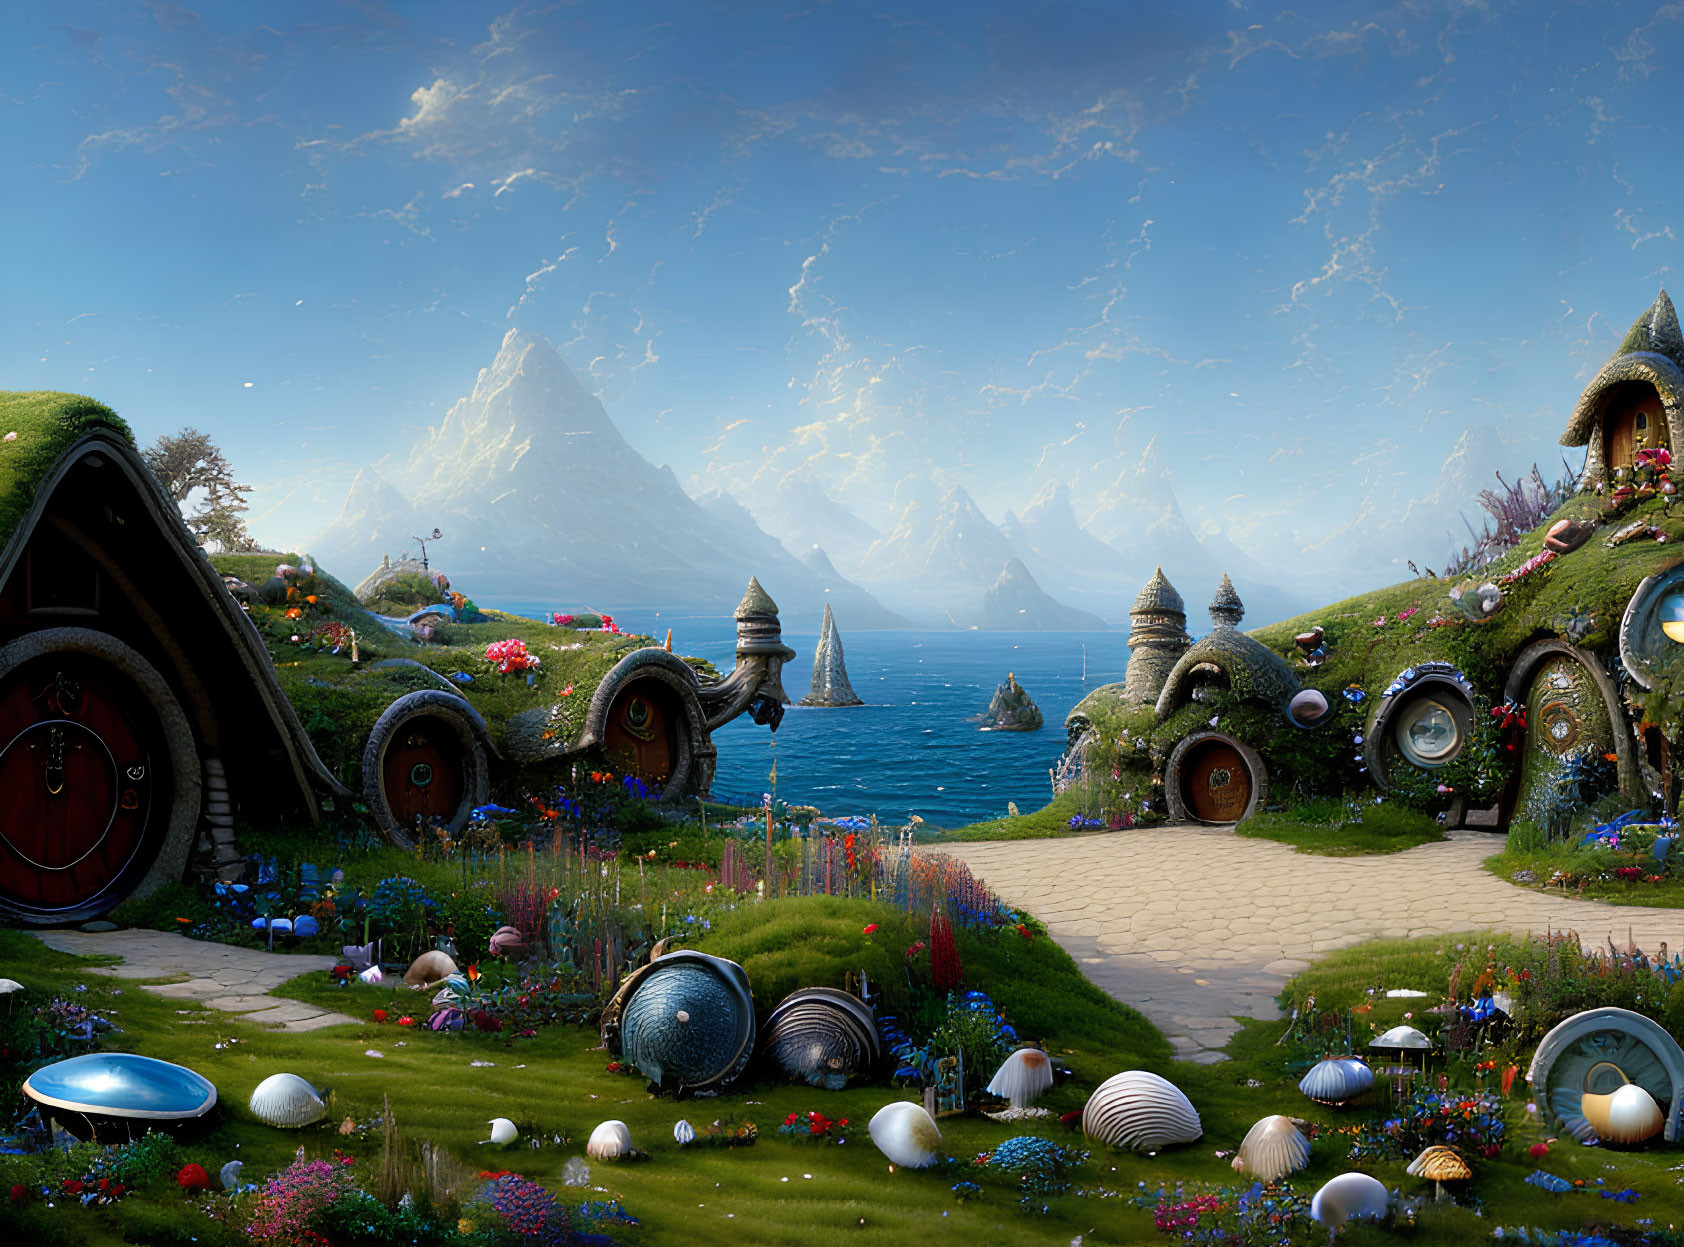 Serene fantasy landscape with hobbit-like houses, gardens, lake, and mountains